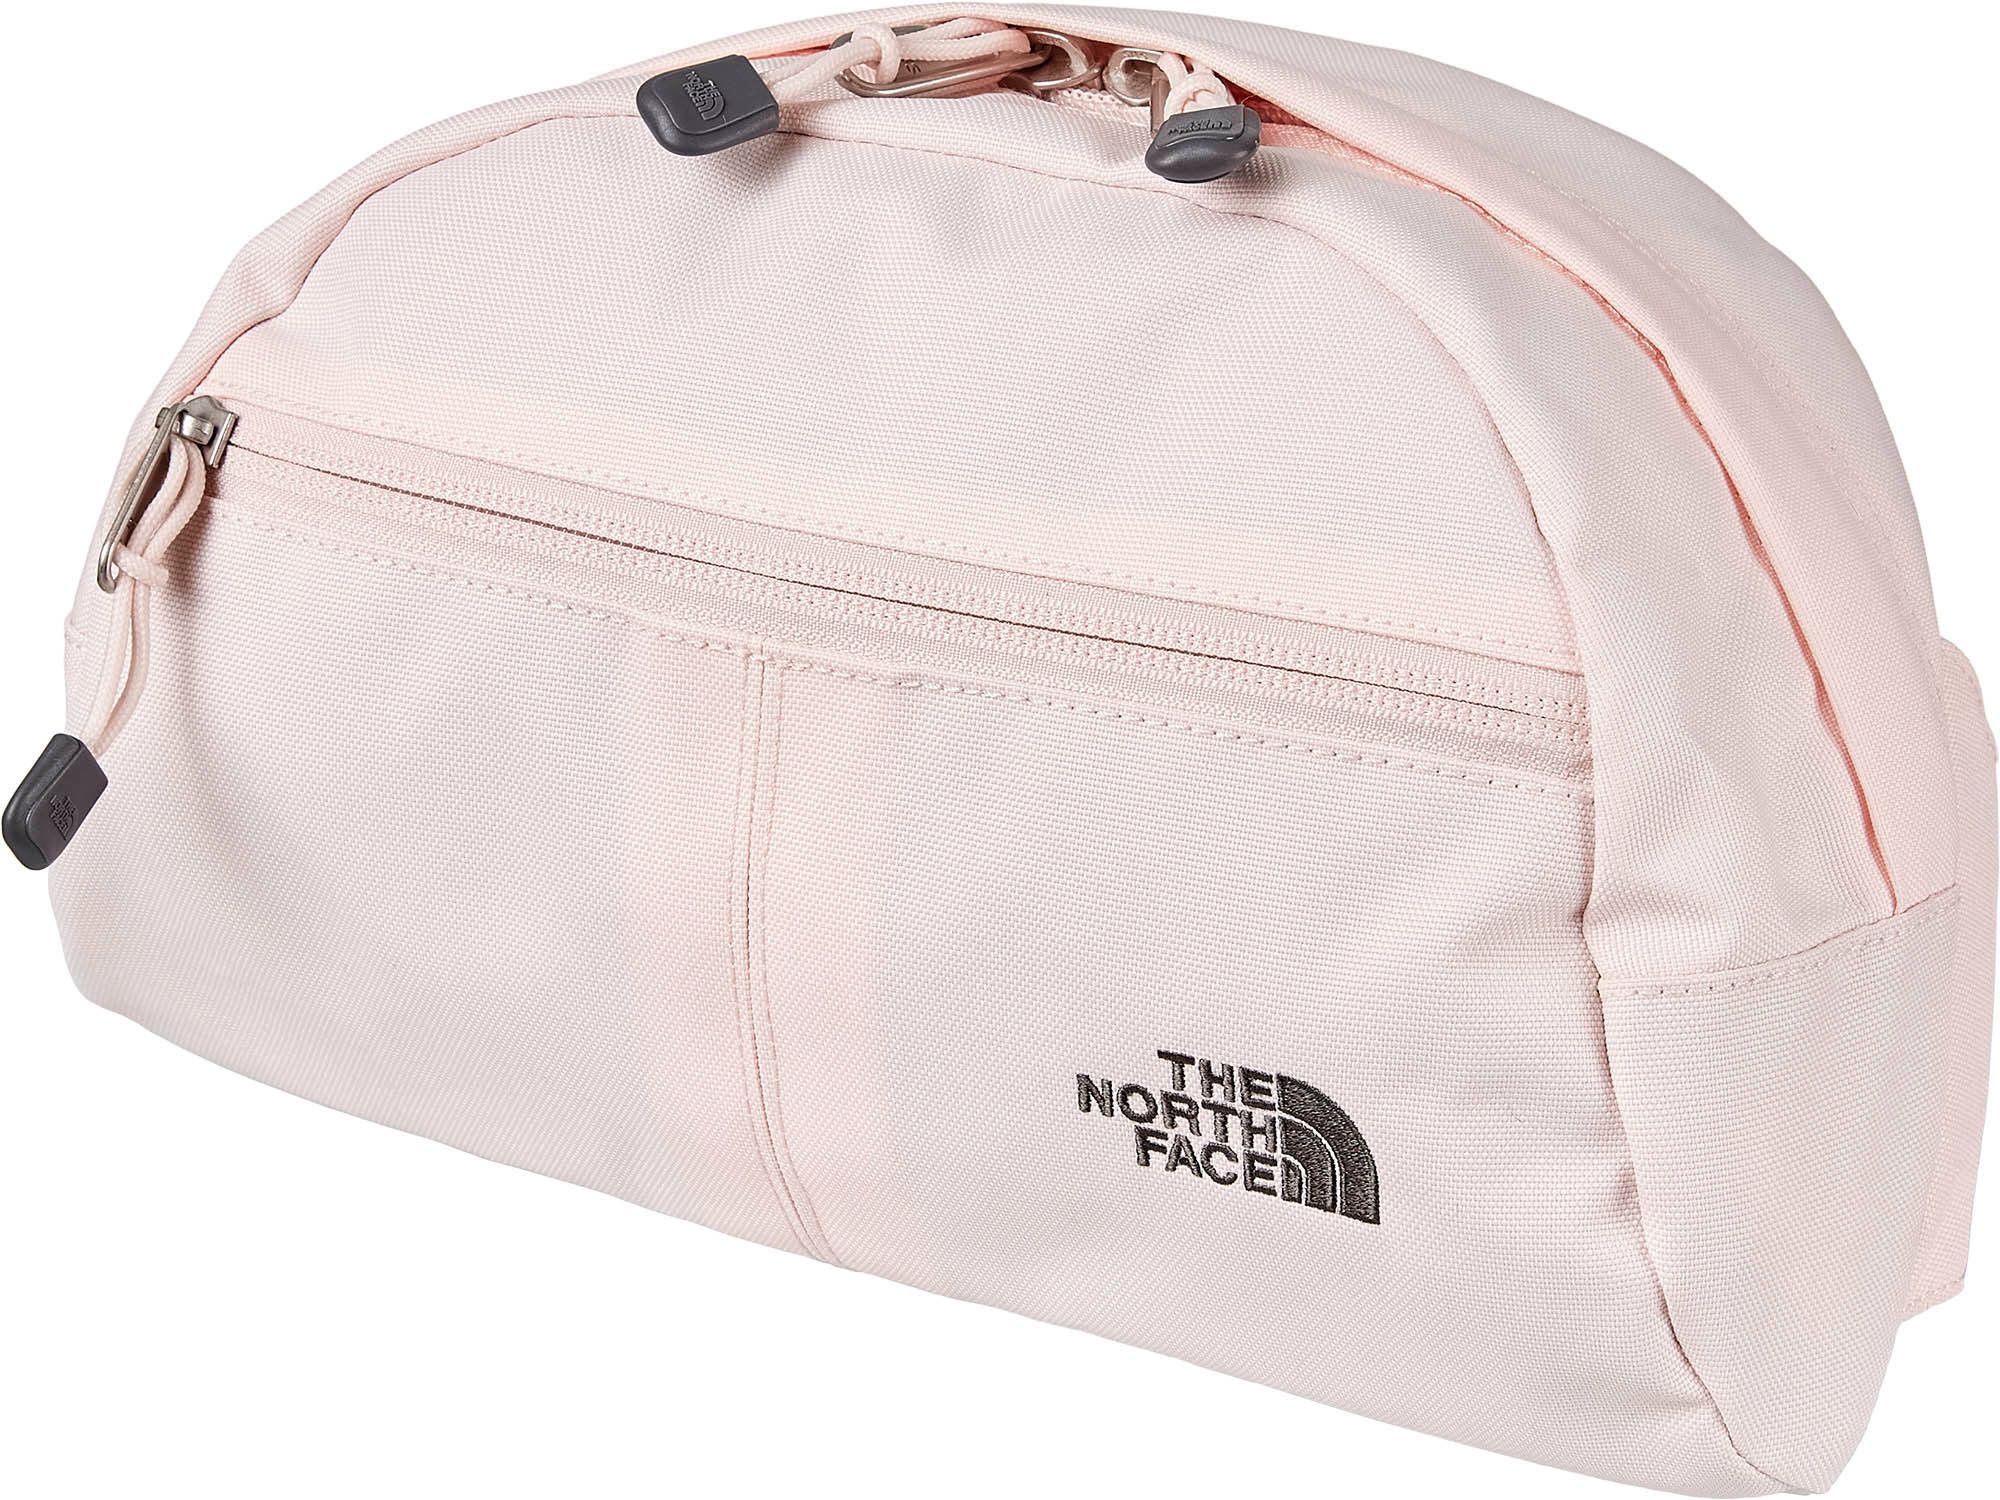 The North Face Roo II Lumbar Pack 